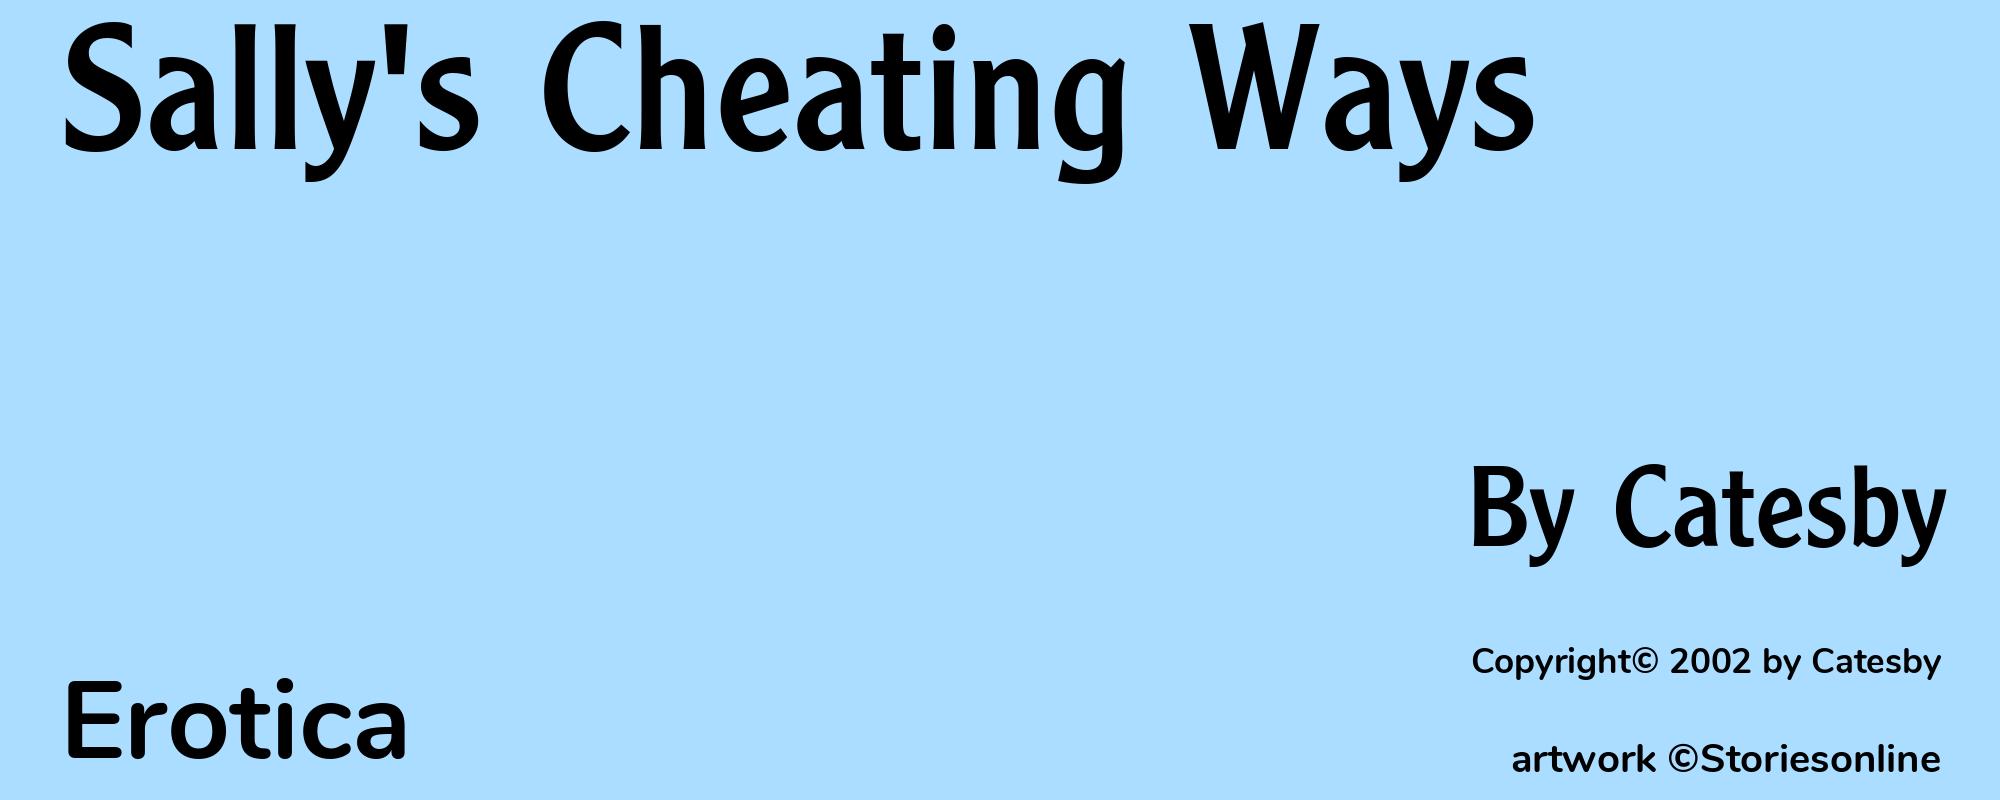 Sally's Cheating Ways - Cover